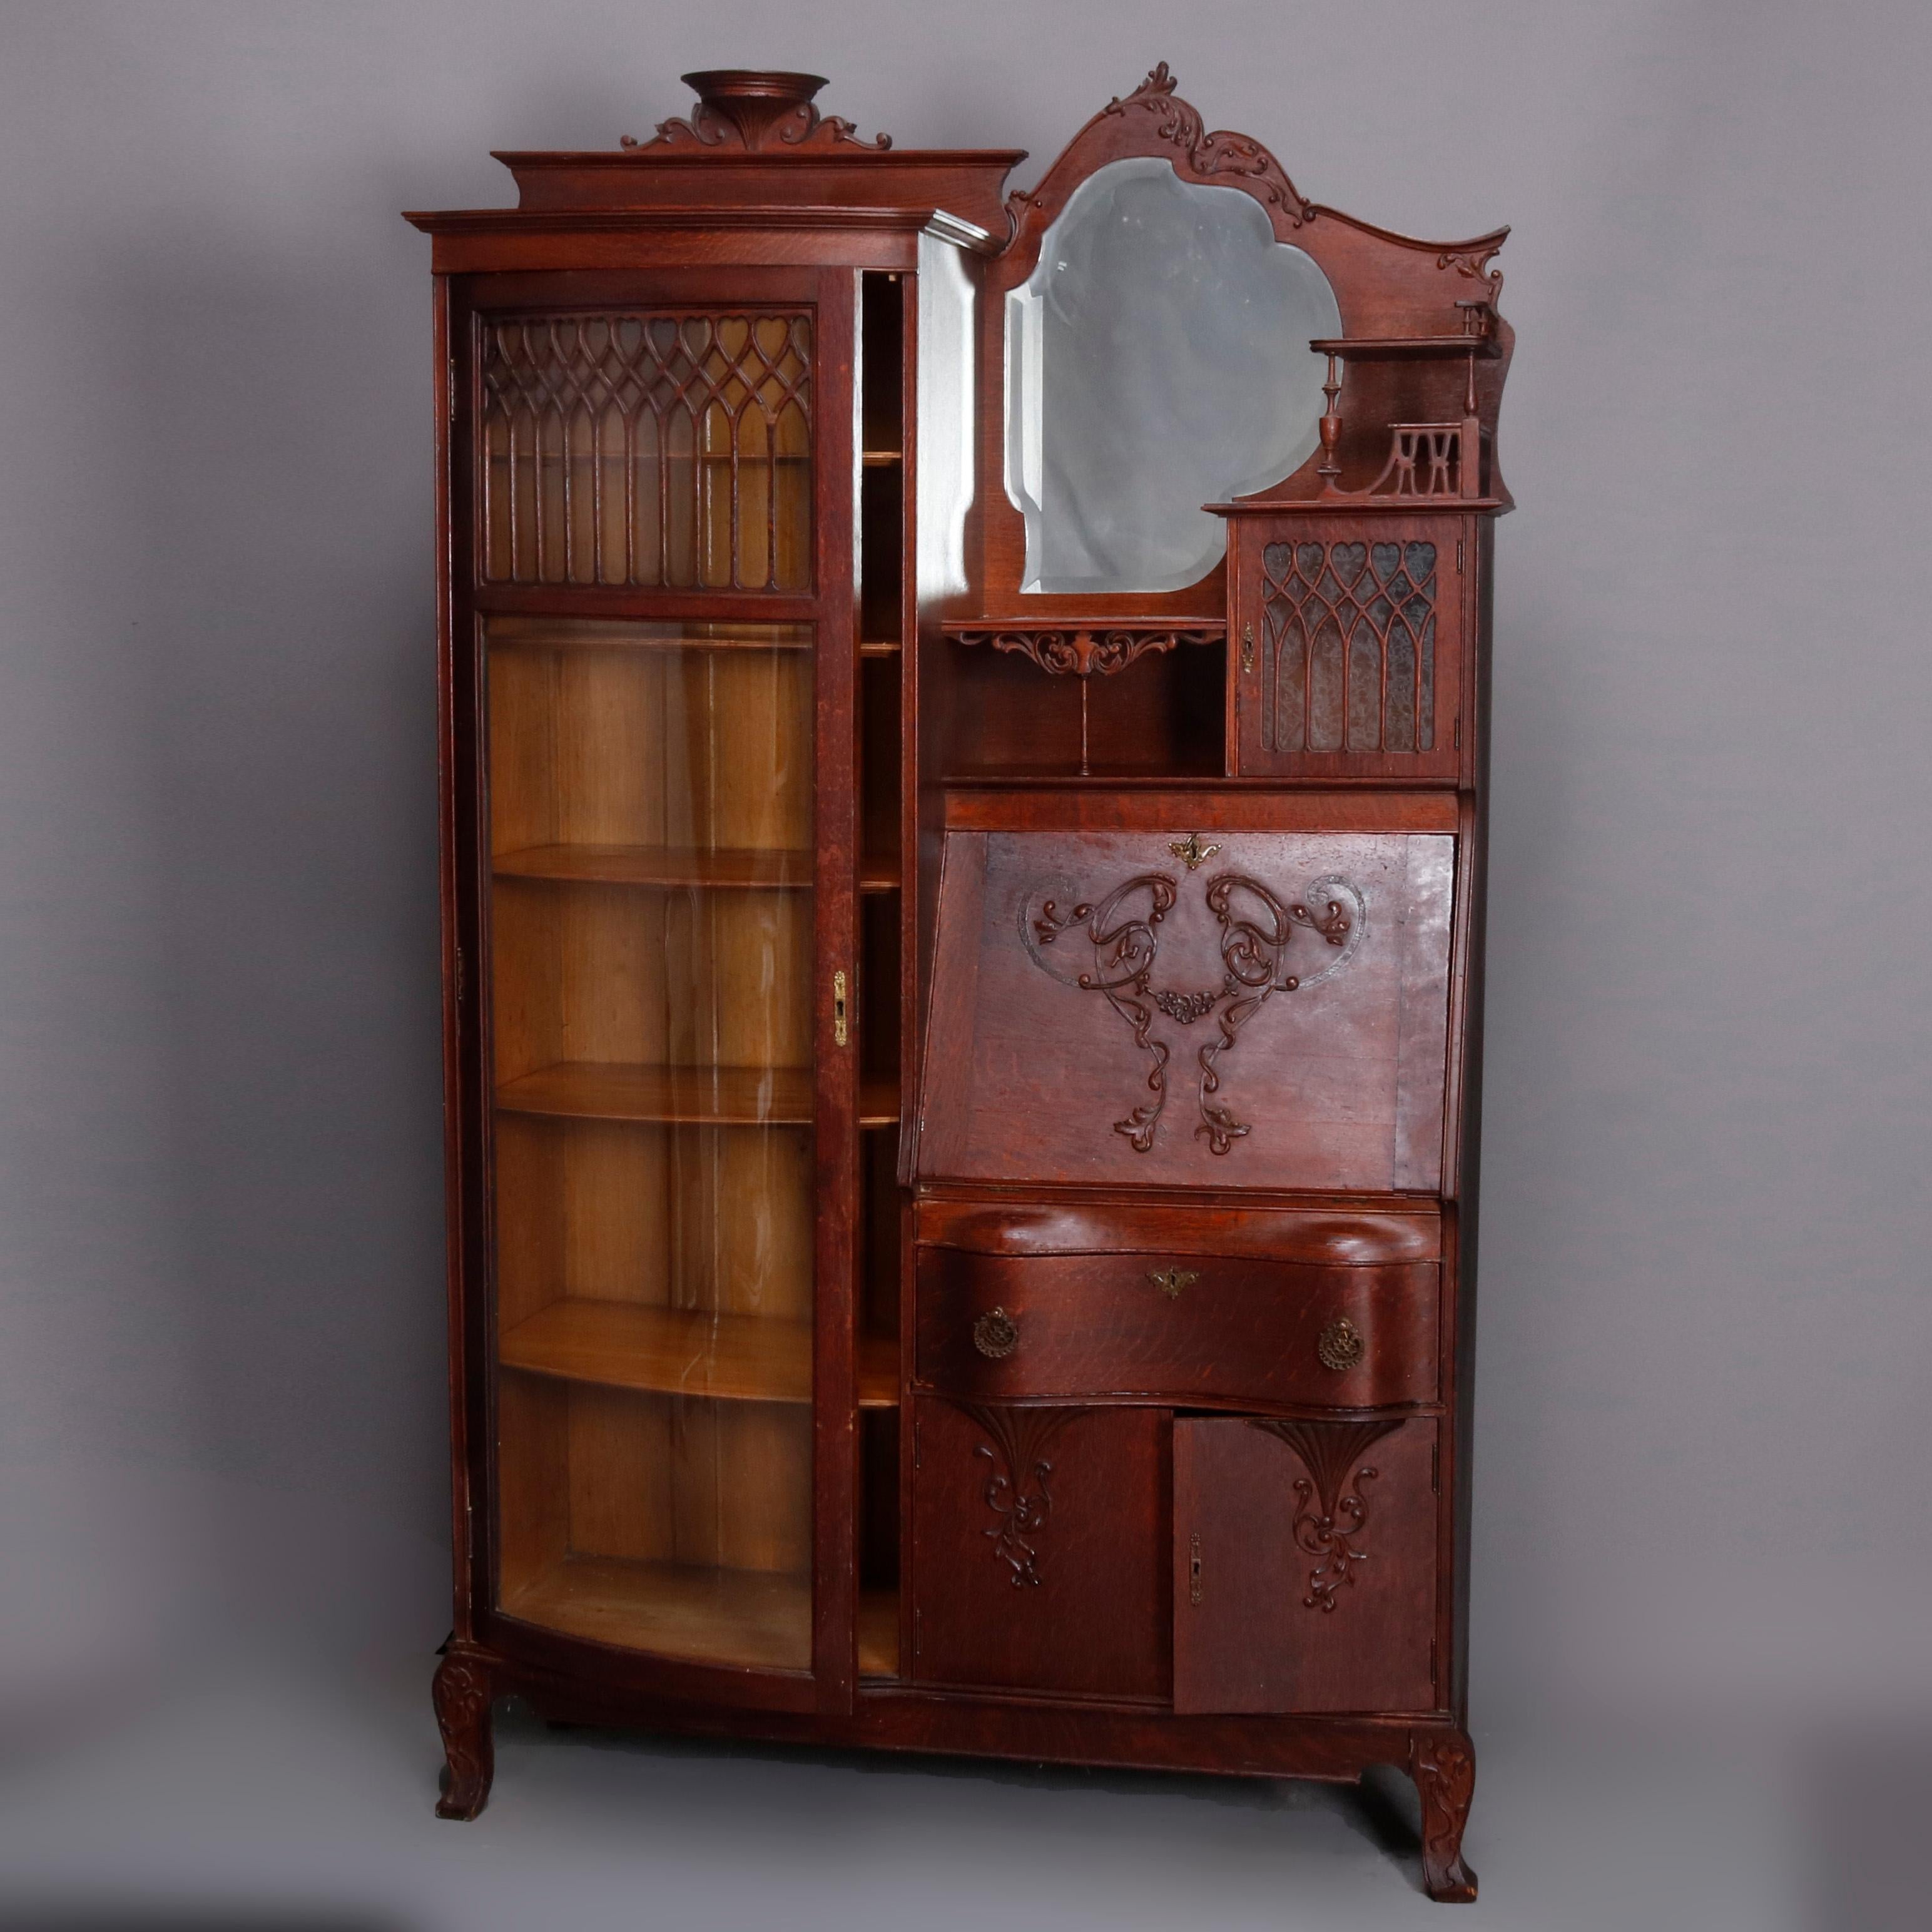 An antique Victorian R.J. Horner style secretary bookcase offers oak construction with urn form crest having flanking foliate and scroll decoration glass front enclosed bookcase, right side with shaped and beveled mirror surmounting secretary with